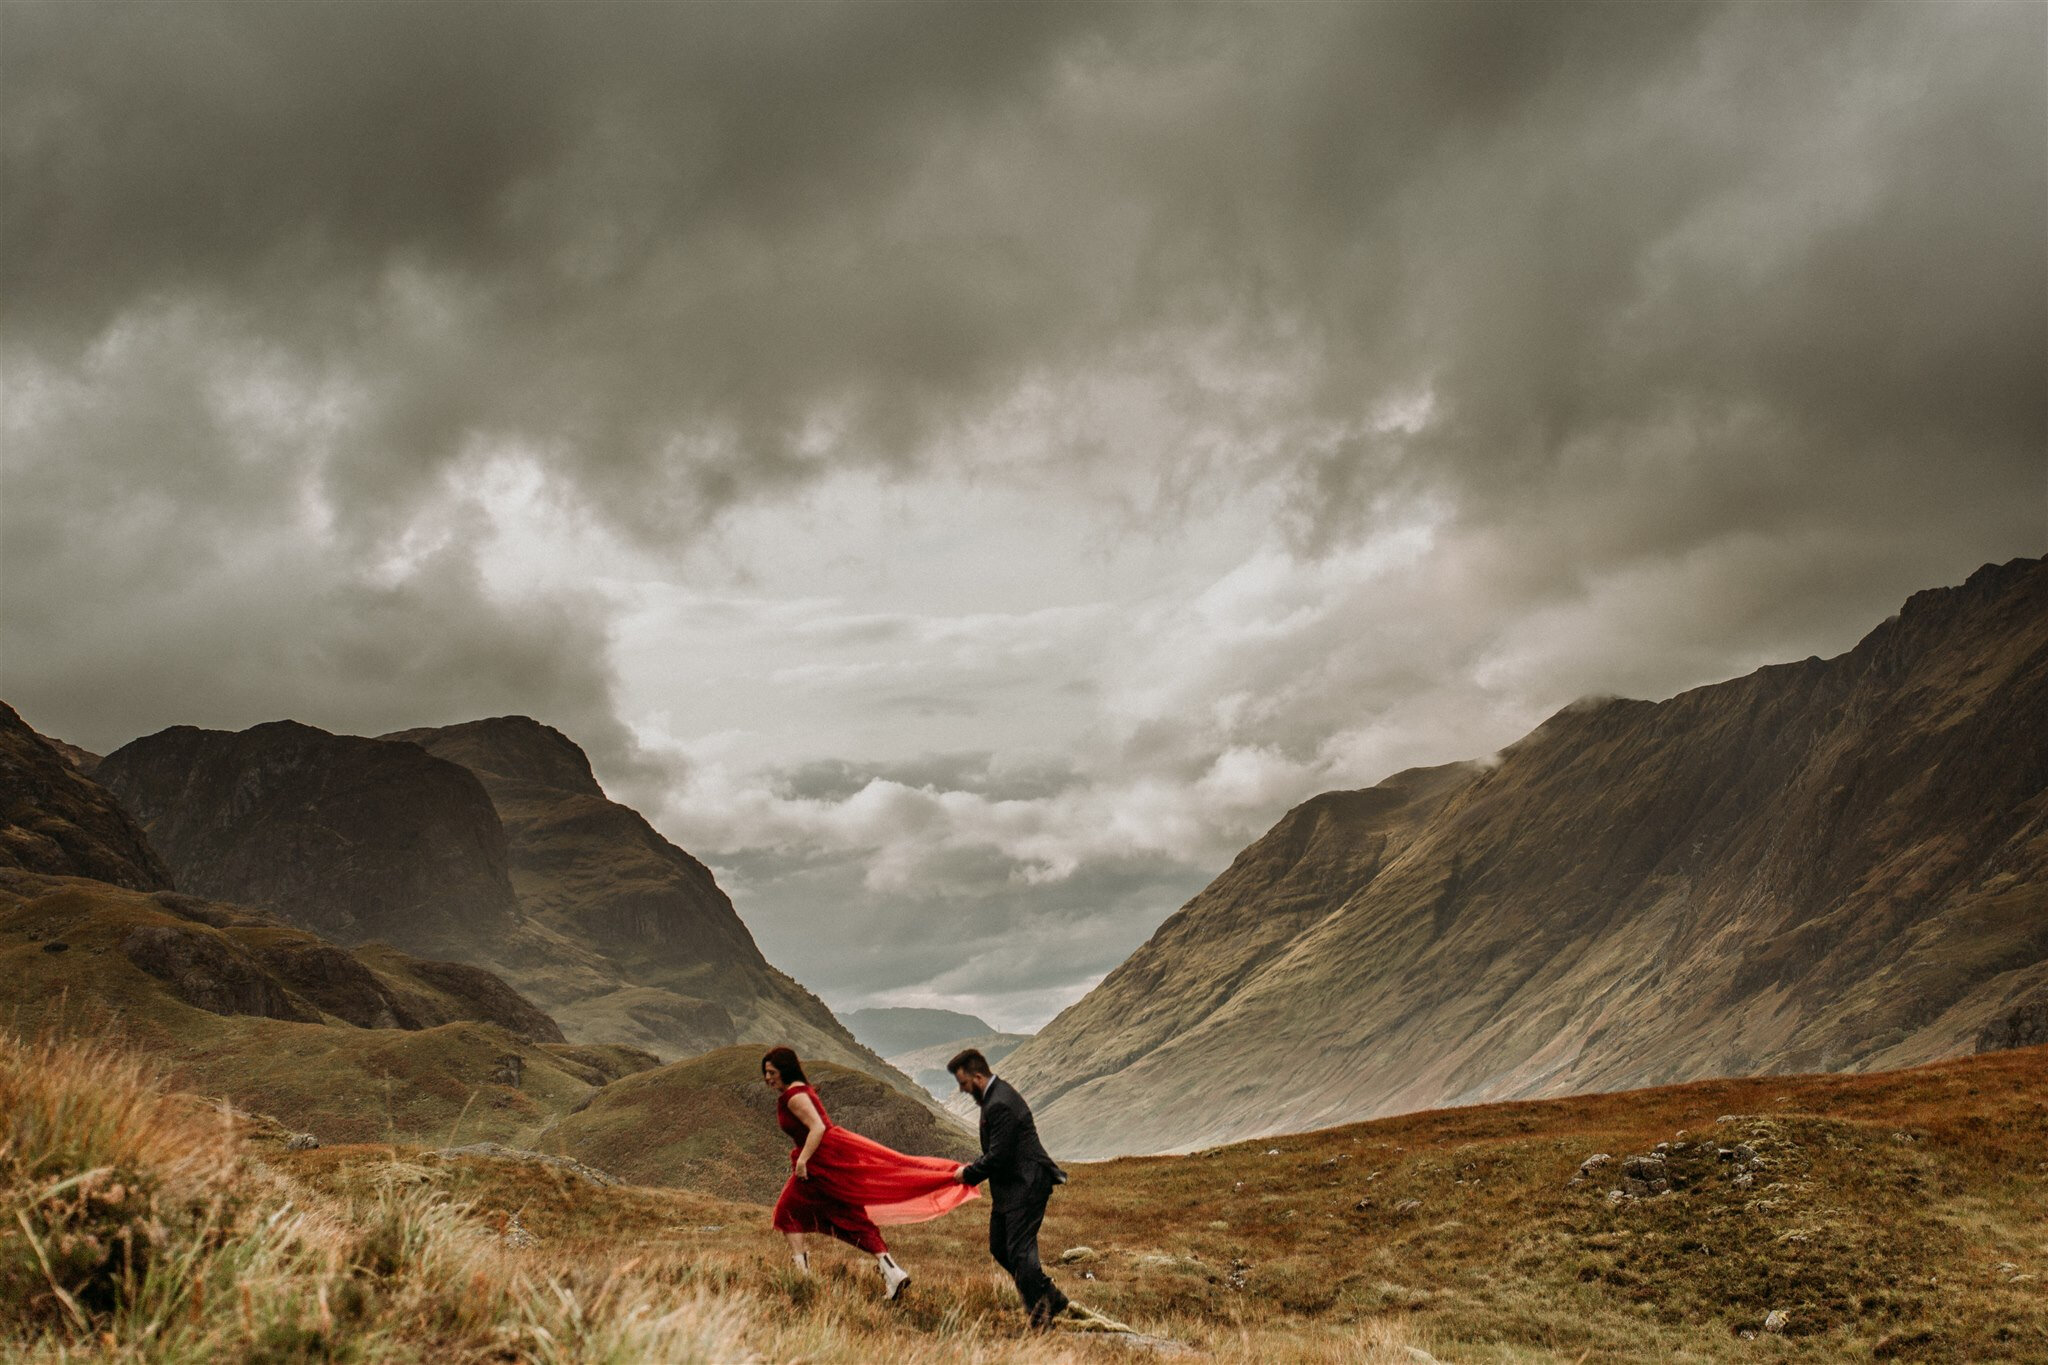 Glen Coe Scotland adventure elopement session. Bride in red dress and her groom walking hand in hand through a windy field in the Scottish Highlands | Adventure elopement photographer